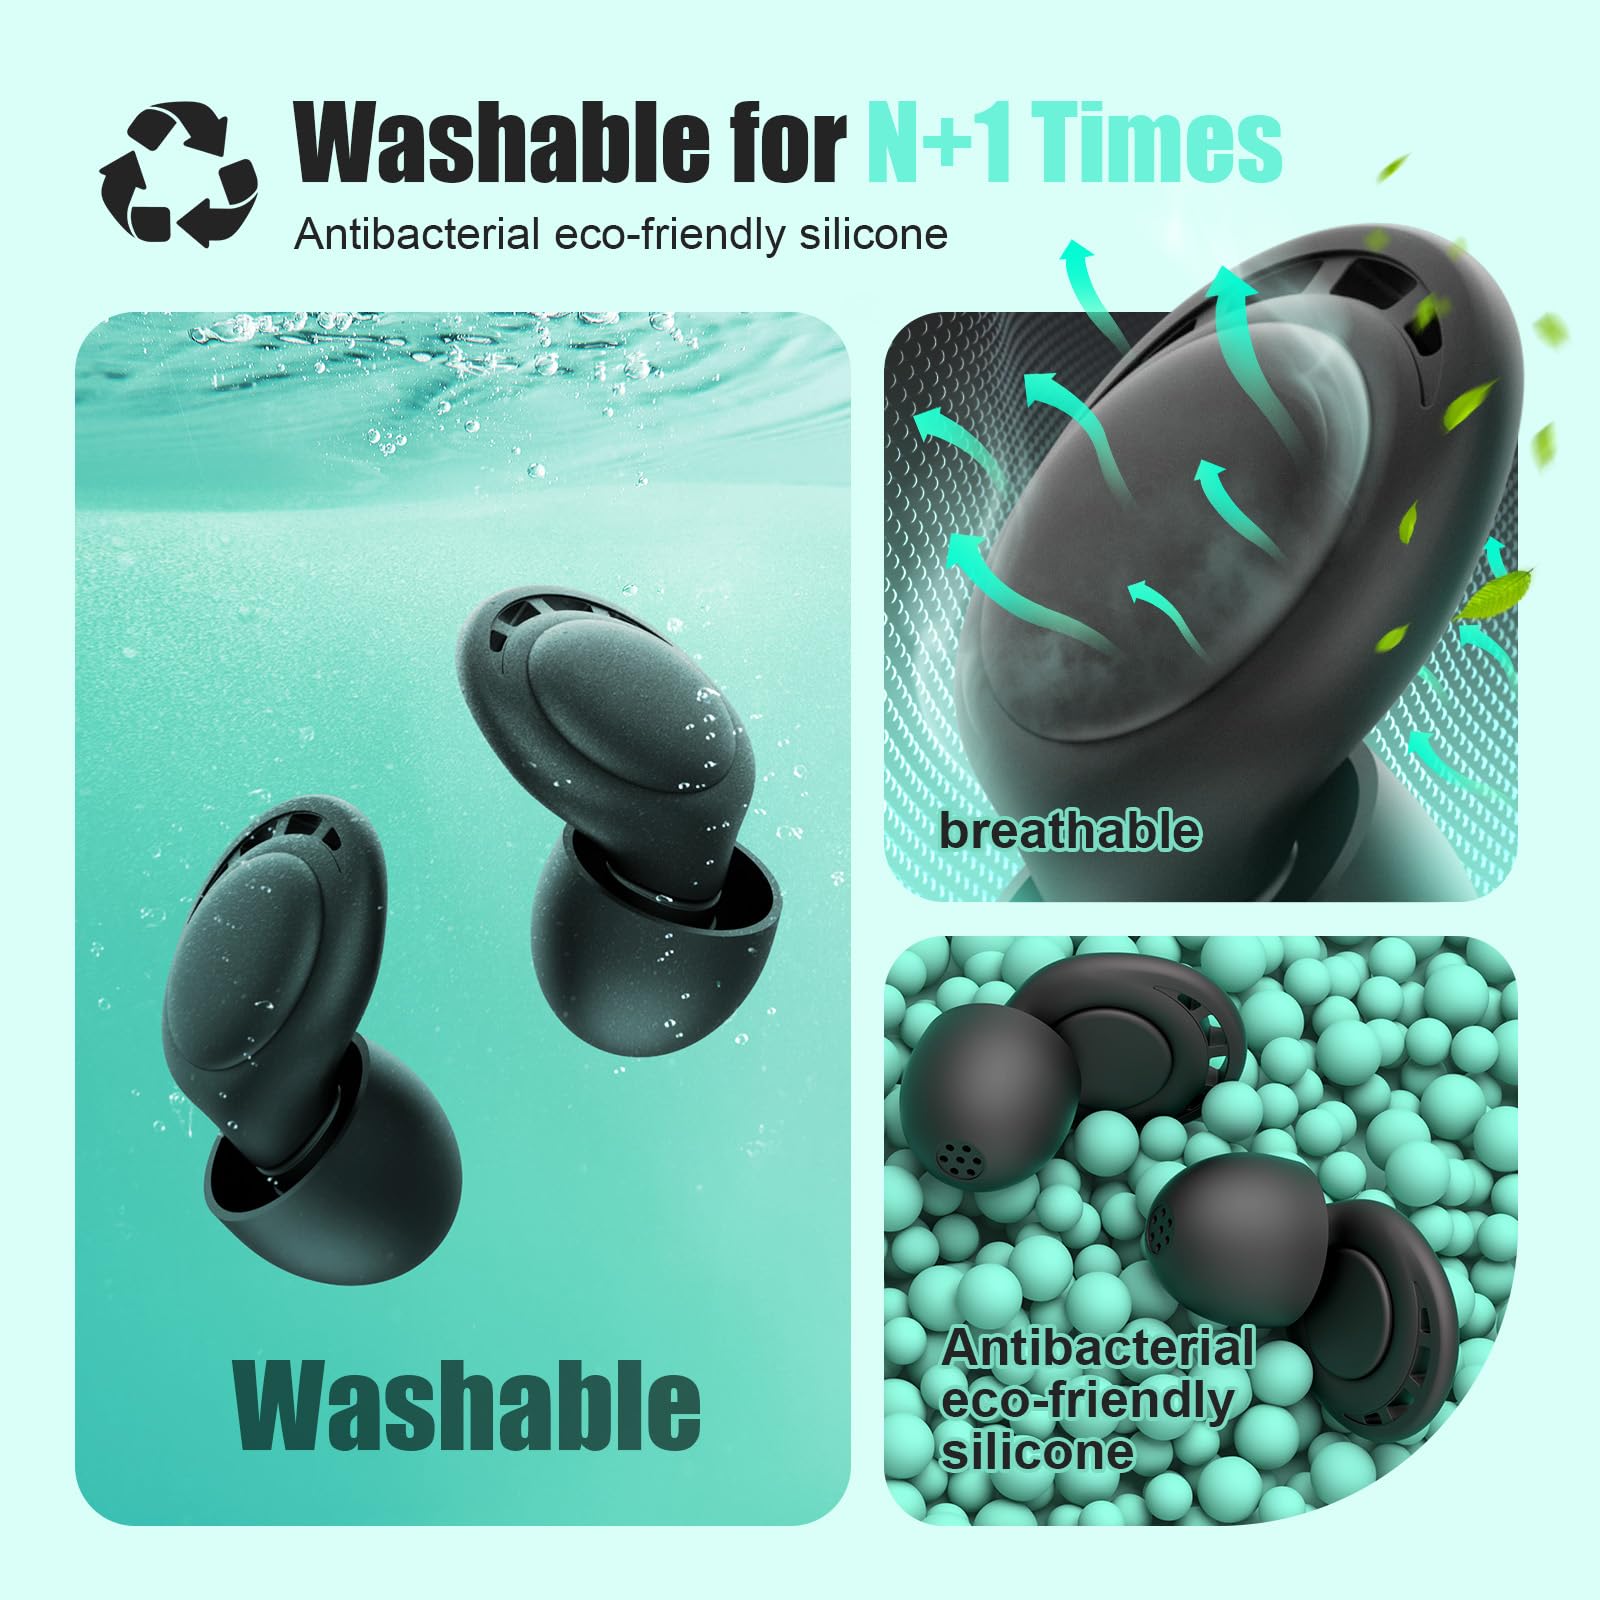 Ear Plugs for Sleeping Noise Reduction, Beinkap Reusable Earplugs Hearing Protection for Focus, Study, Work – 6 Pair Eartips in S/M/L – Flexible Silicone Soft – 35dB Noise Cancelling with Storage Case